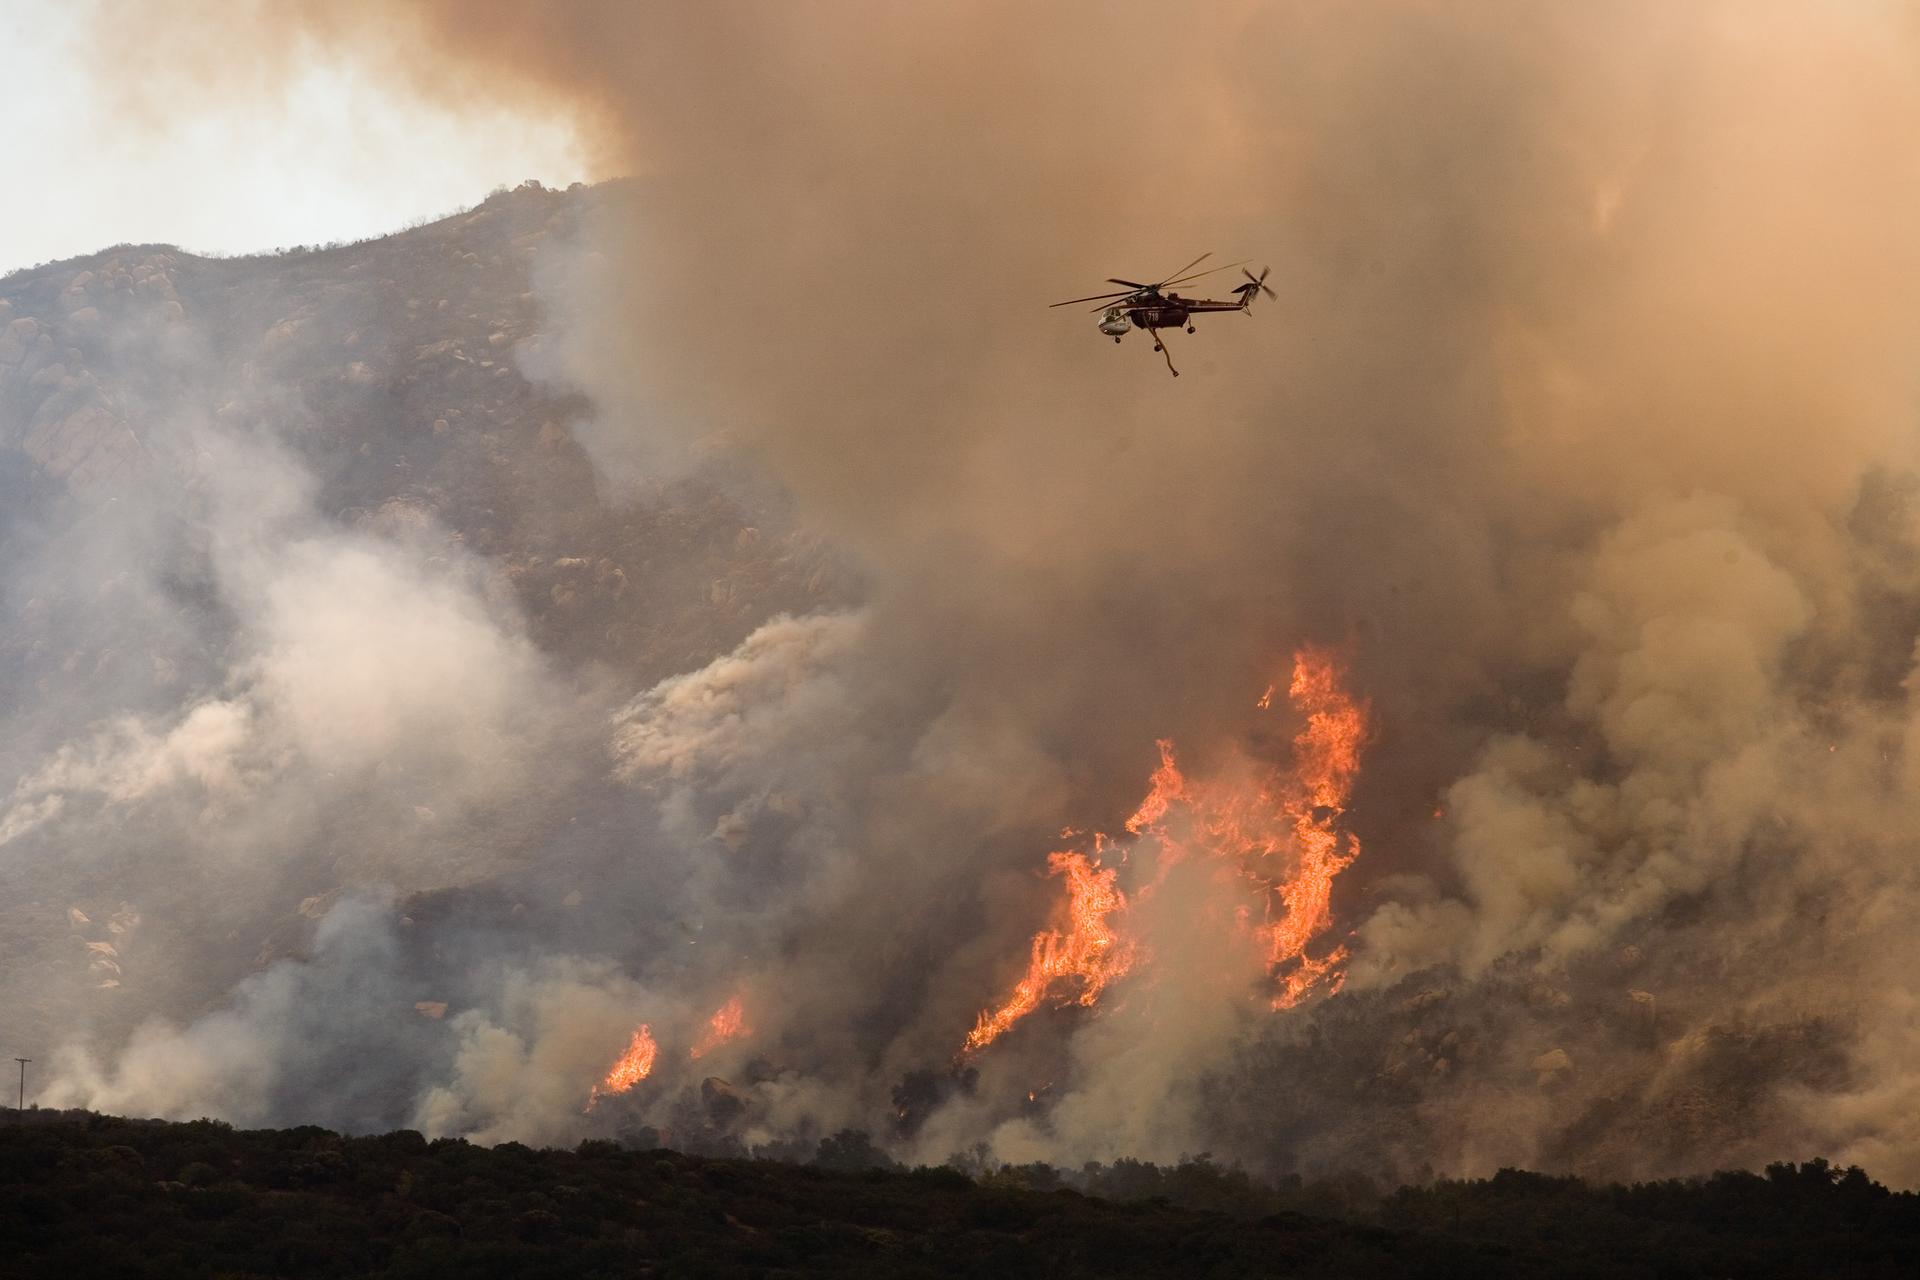 Helicopter dropping water on wildfire